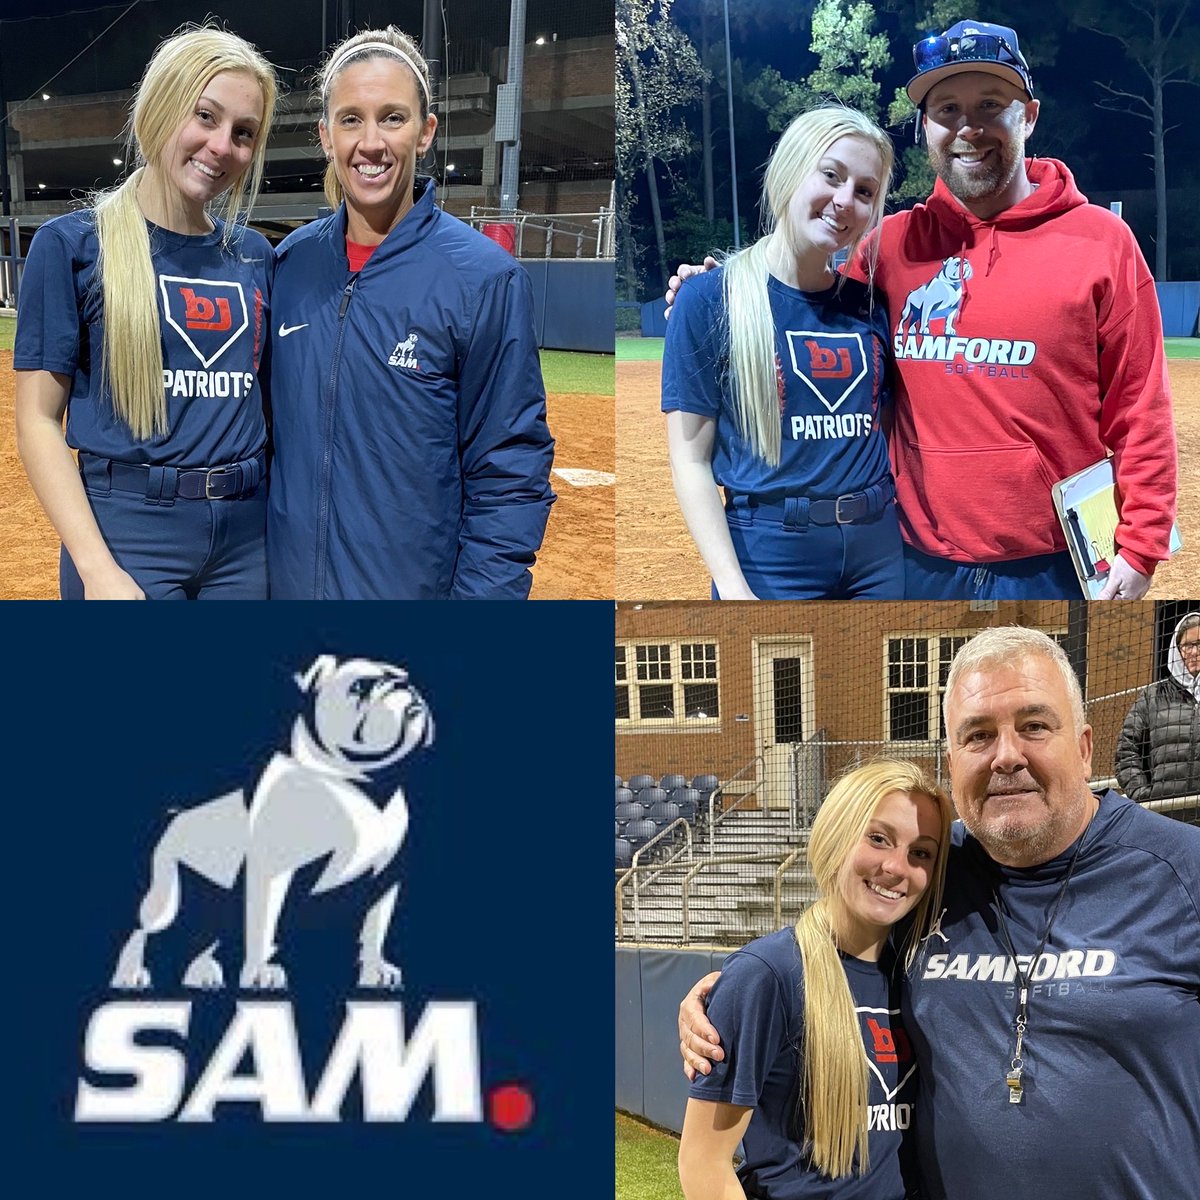 Spent the last day of Thanksgiving break at the ⁦@SamfordSB⁩ All Skills camp! Loved hanging out with Coaches ⁦@CassadyKimball⁩ ⁦@gillespie_jeff⁩ ⁦@BaynesCoach⁩ again! Go Bulldogs!